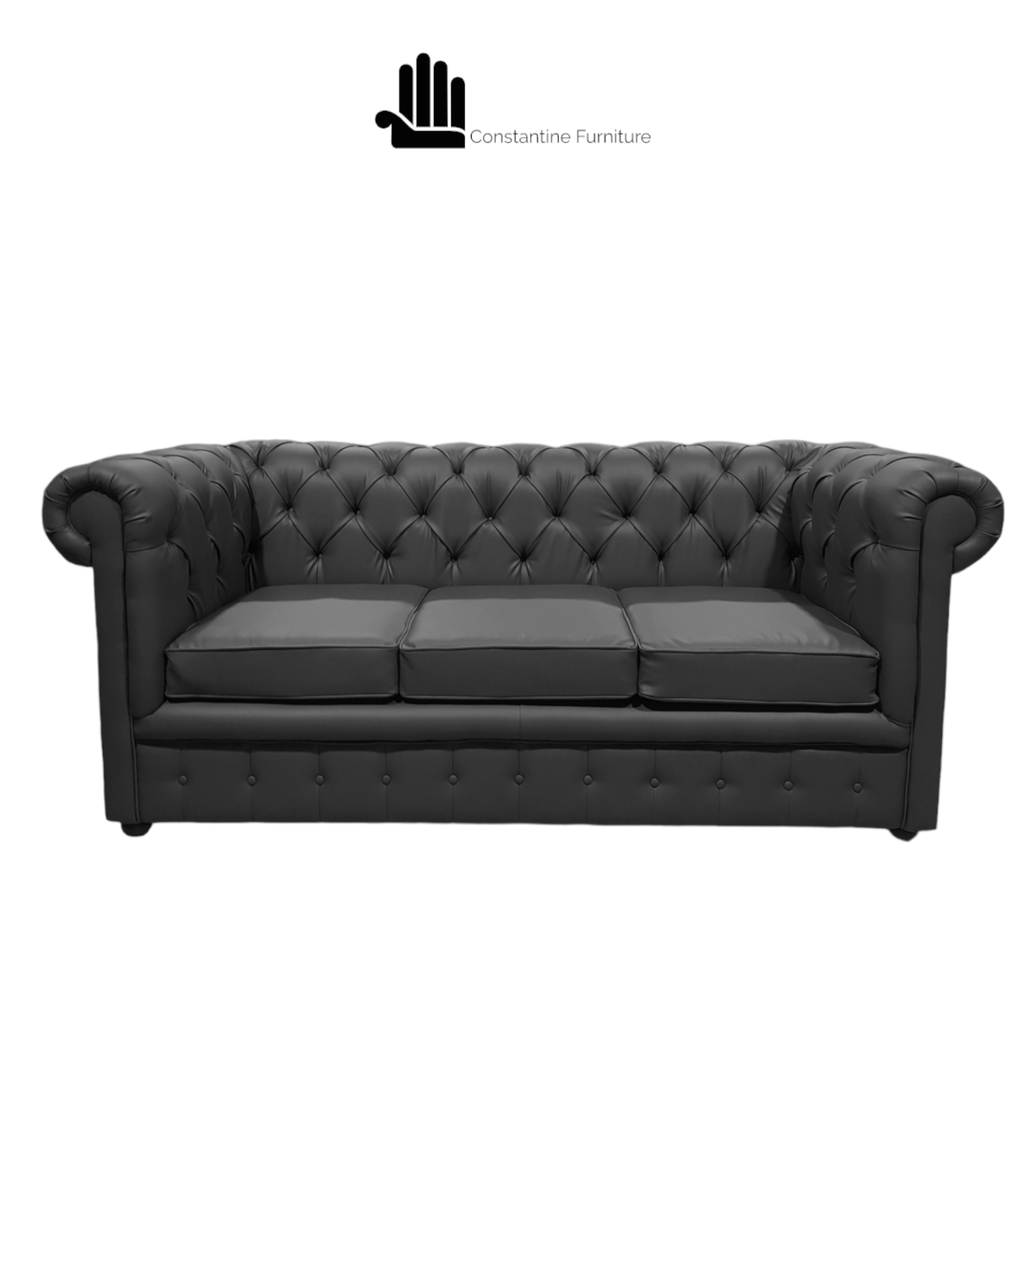 3 seater chesterfield sofa